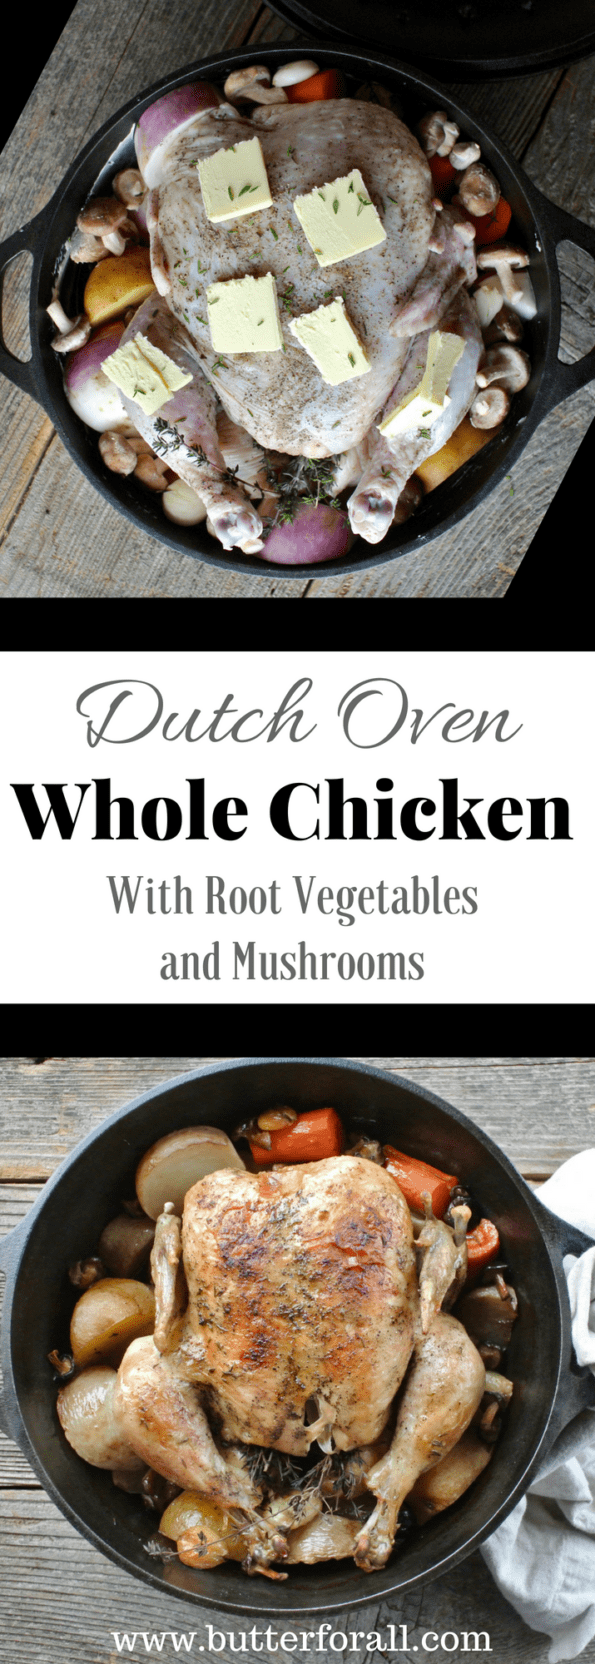 Dutch oven roasted chicken with seasonal vegetables collage with text overlay.